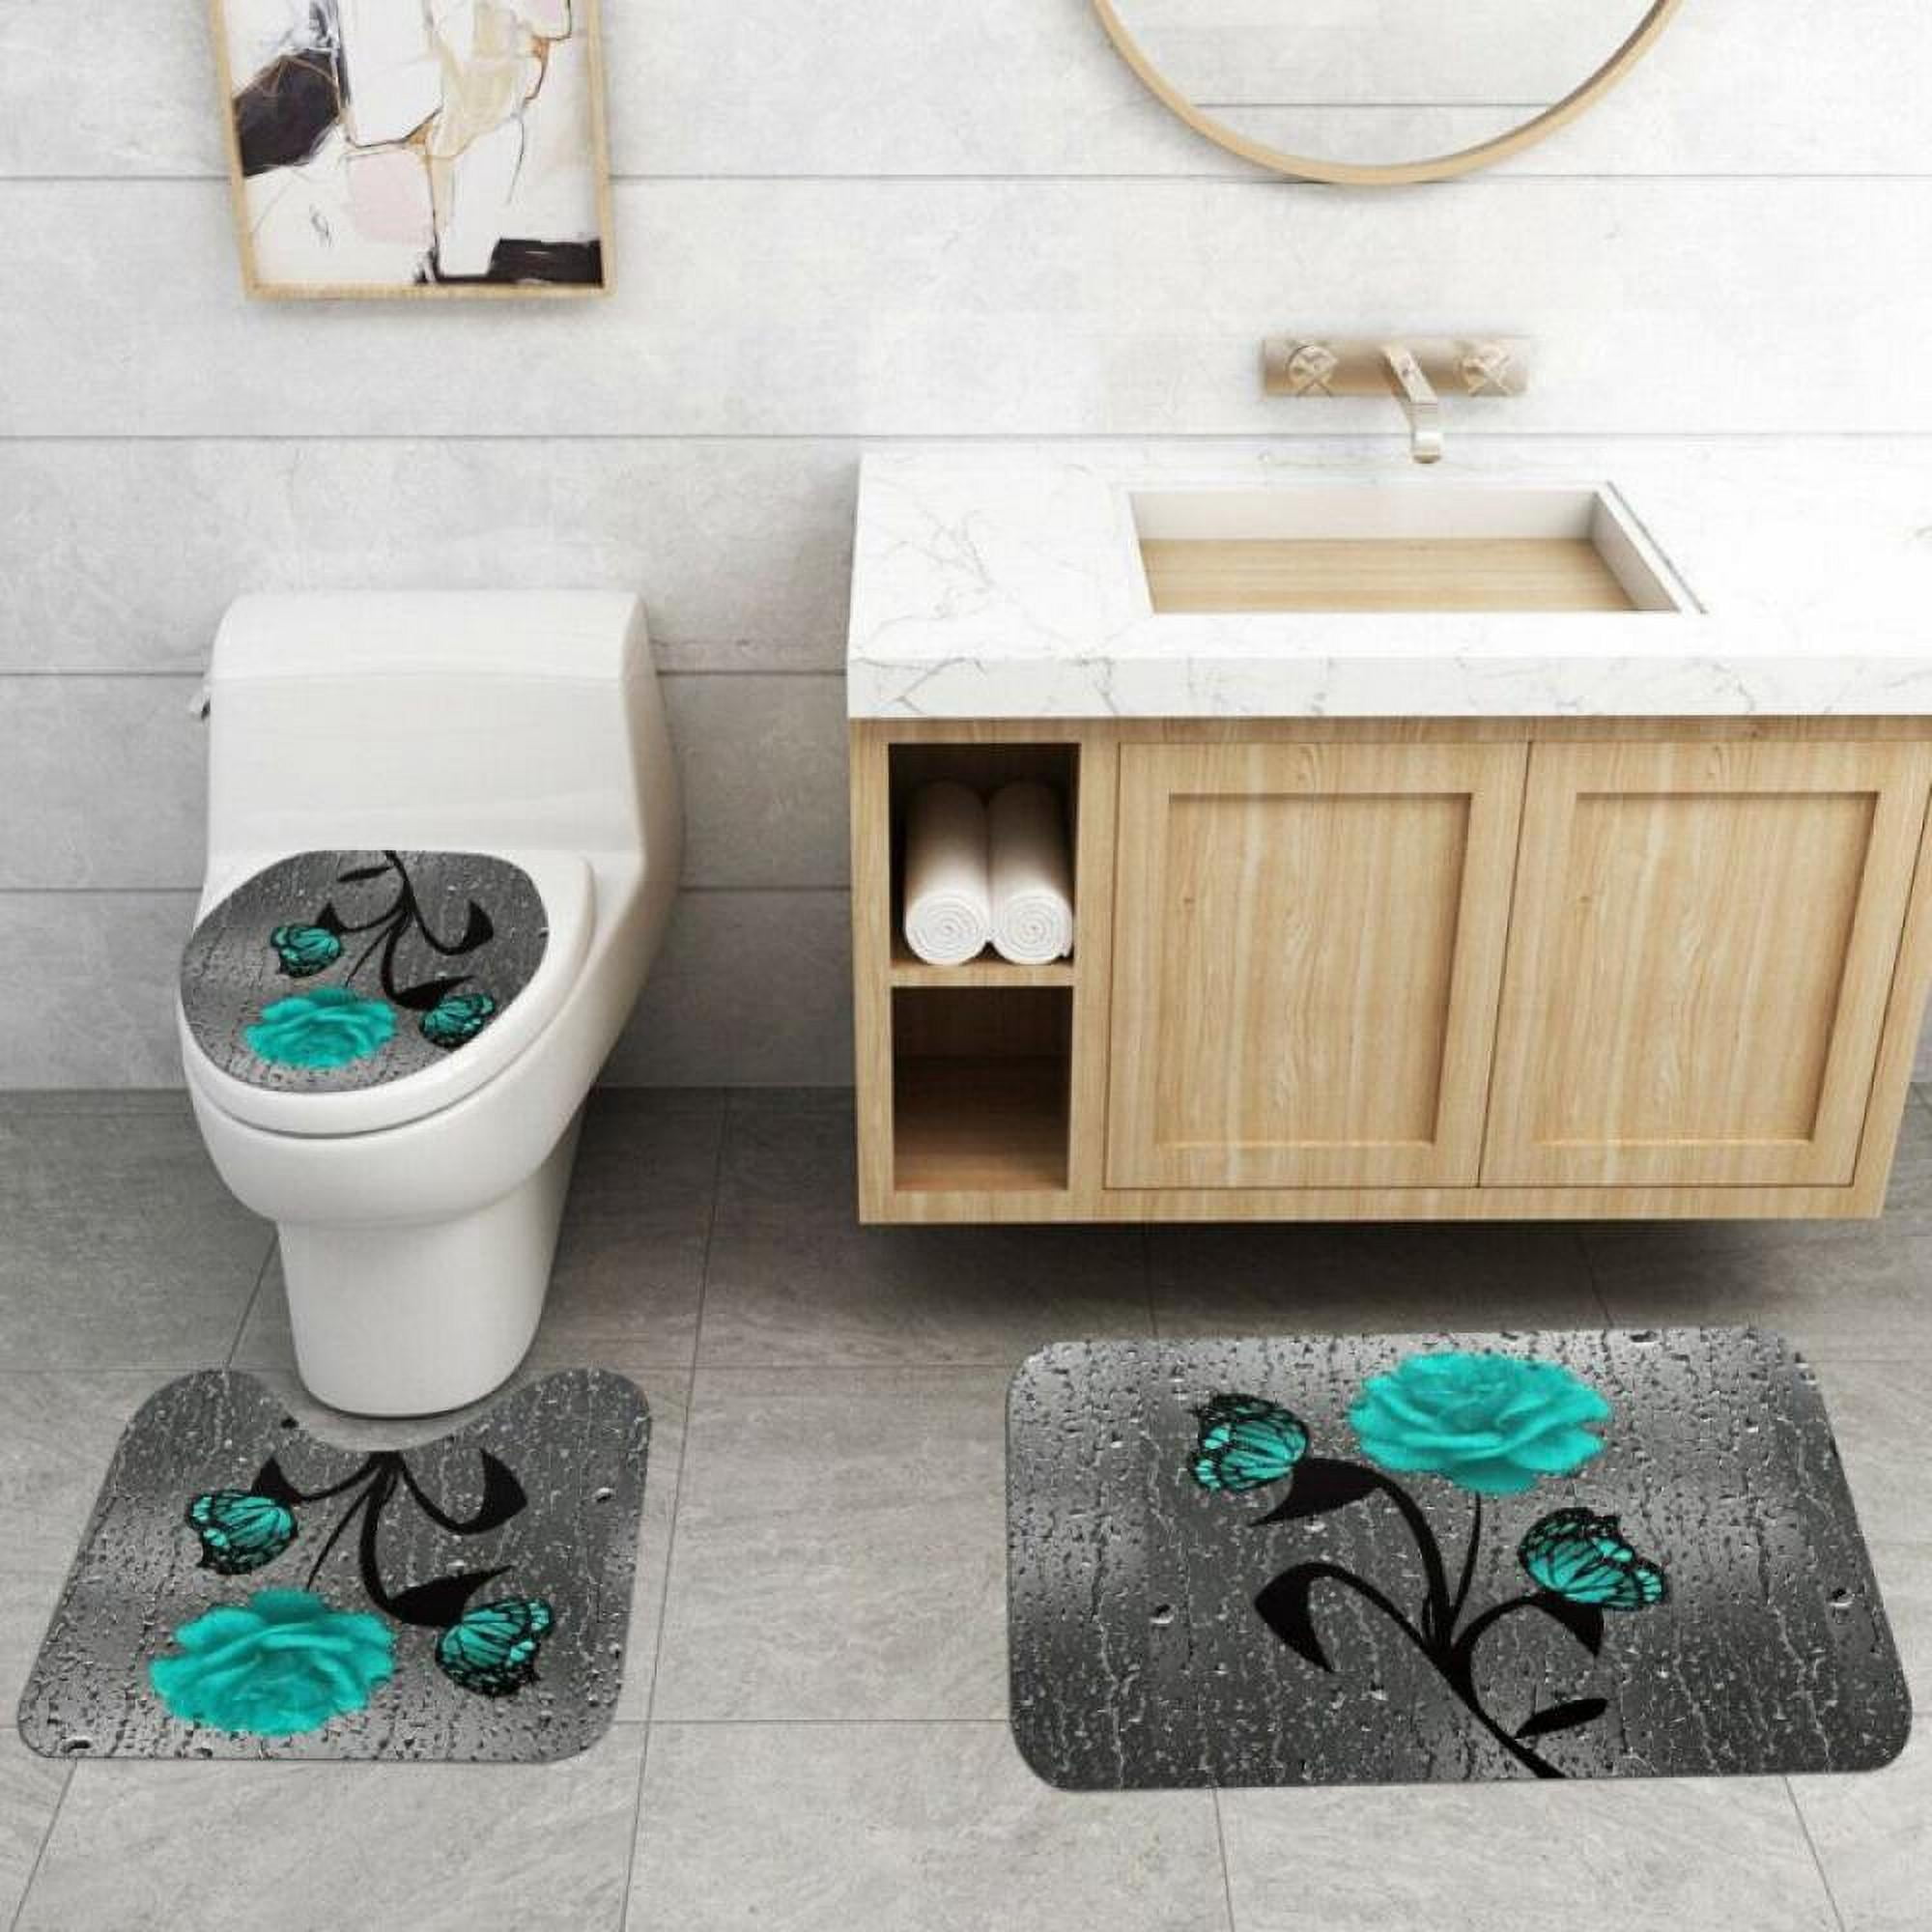 Details about   Tampa Bay Buccaneers Bathroom Rugs Set 4PCS Shower Curtain Toilet Seat Cover 